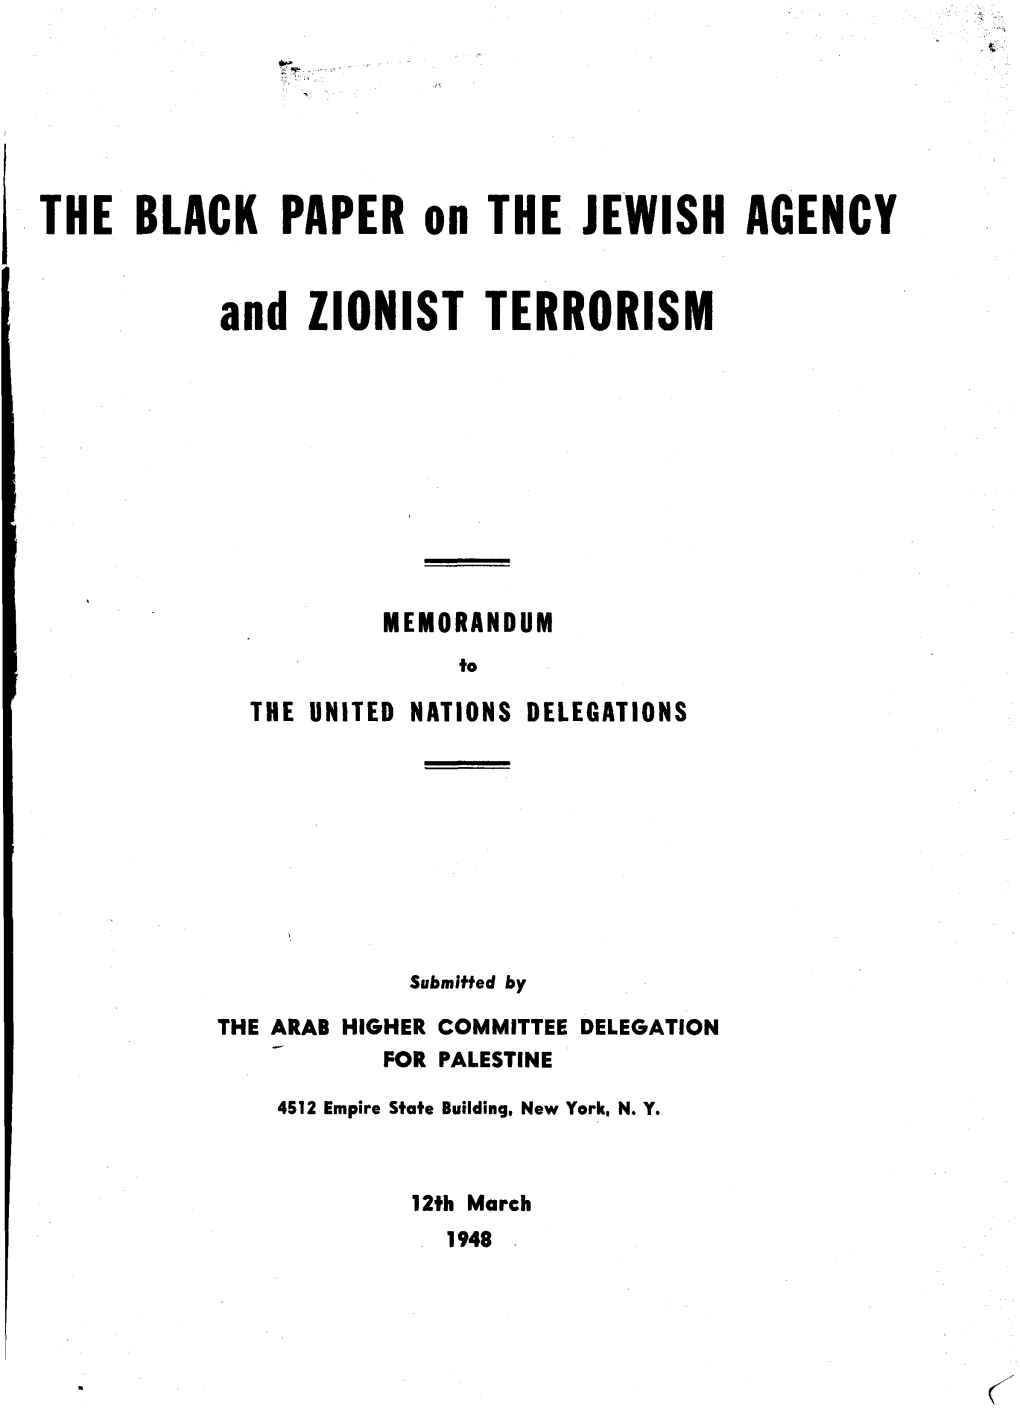 THE BLACK PAPER on the JEWISH AGENCY and ZIONIST TERRORISM